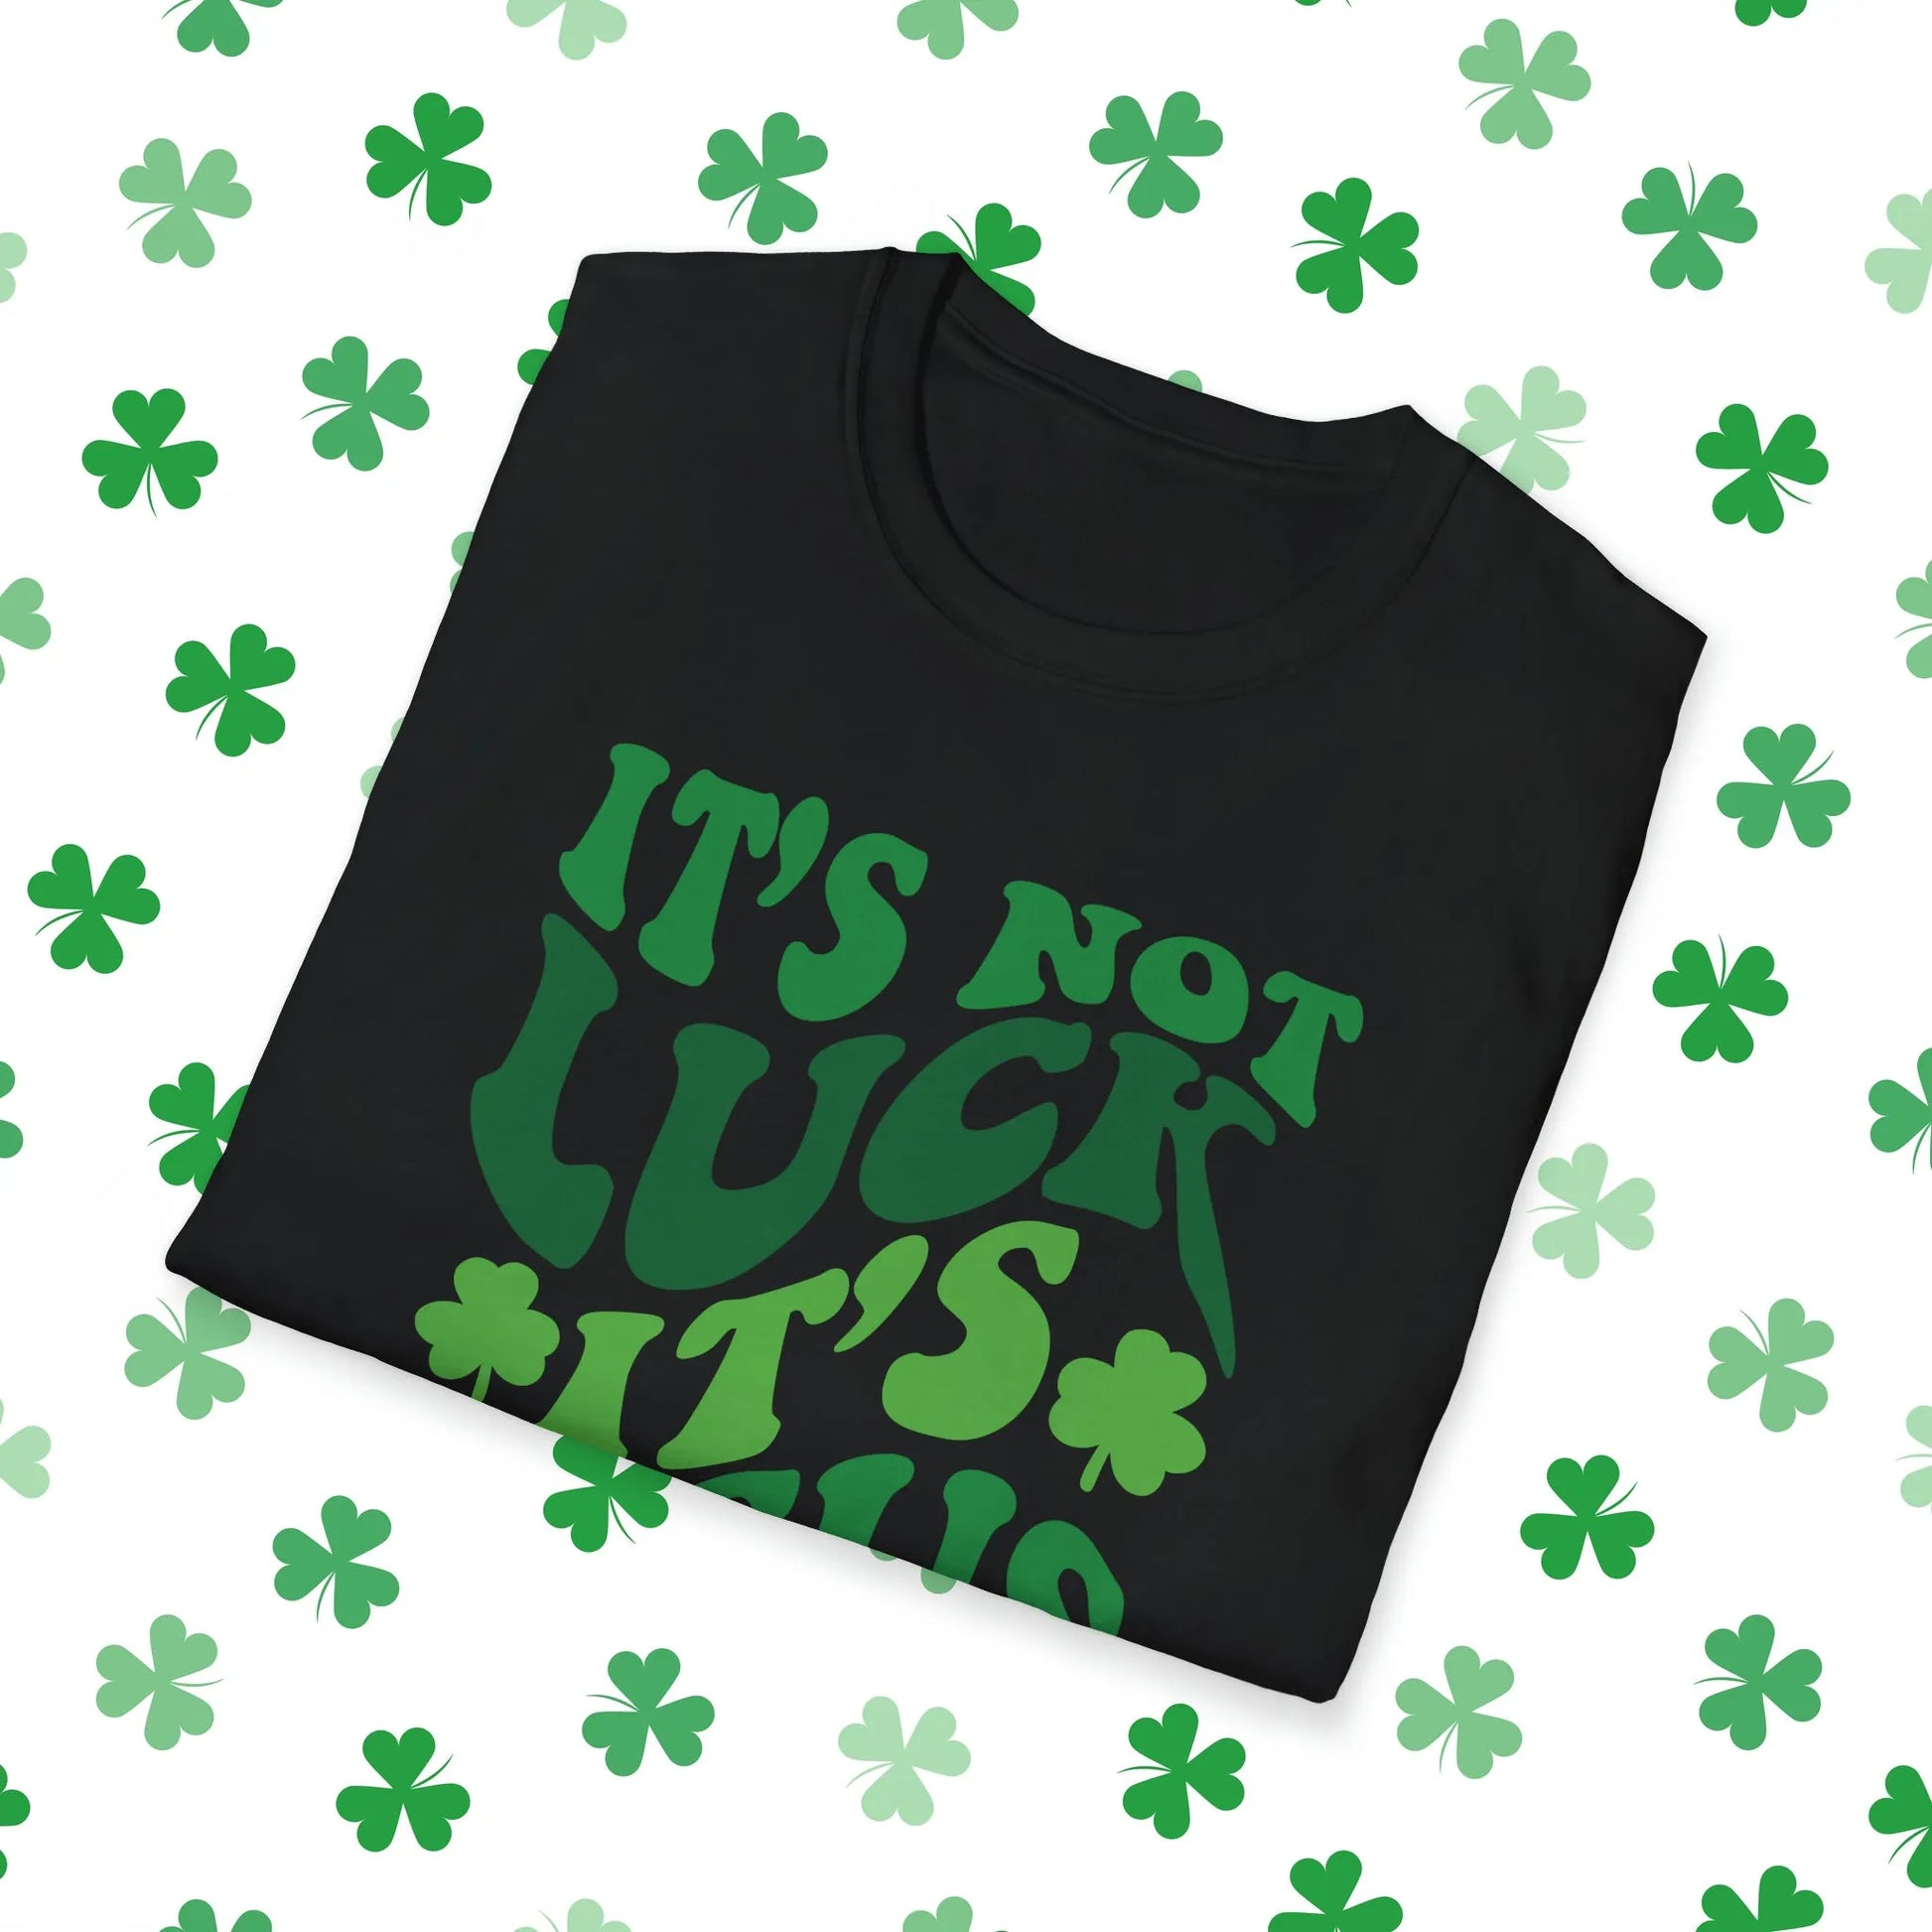 It's Not Luck It's Jesus Retro-Style St. Patrick's Day T-Shirt - Comfort & Charm - It's Not Luck It's Jesus St. Patrick's Day Shirt Black Folded